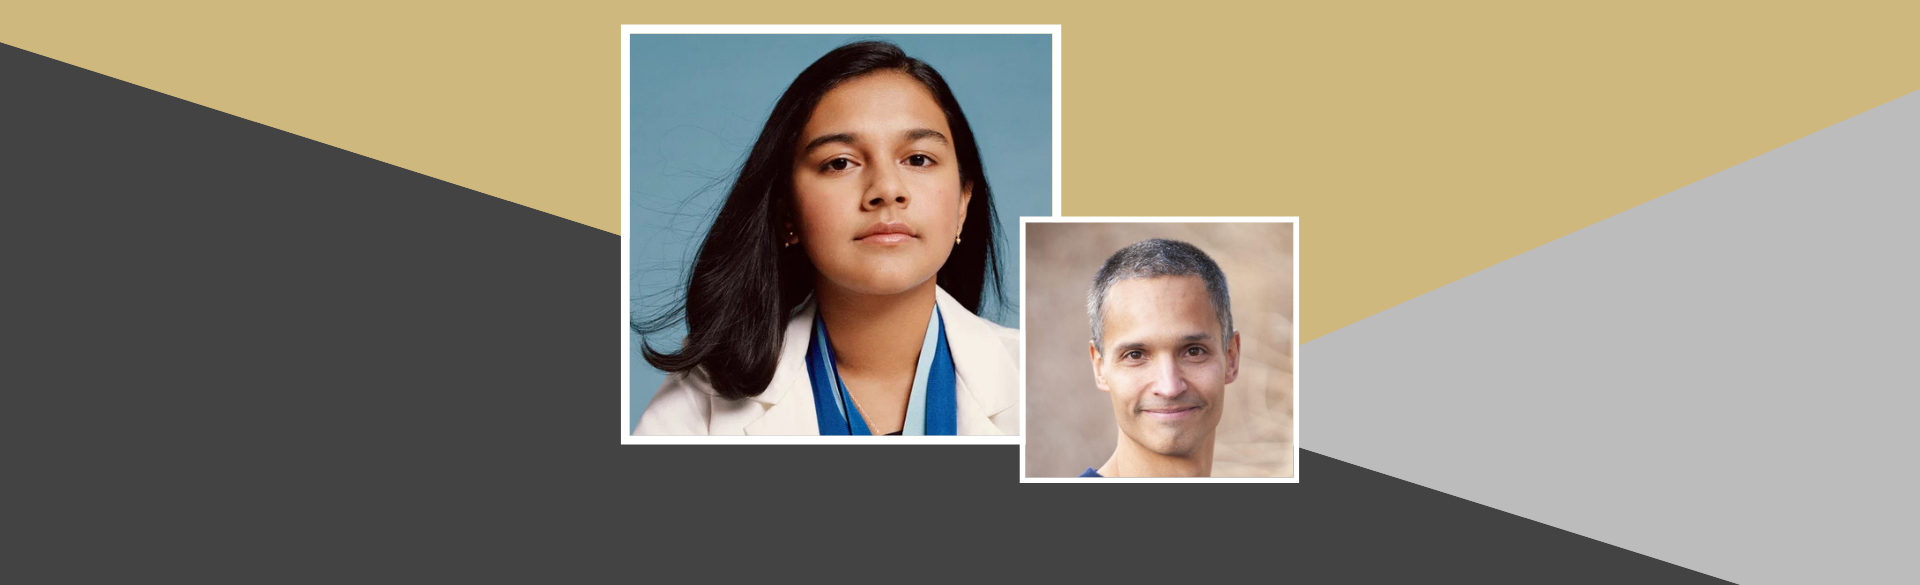 CU School of Medicine Faculty Member Mentors Time Magazine’s ‘Kid of the Year’